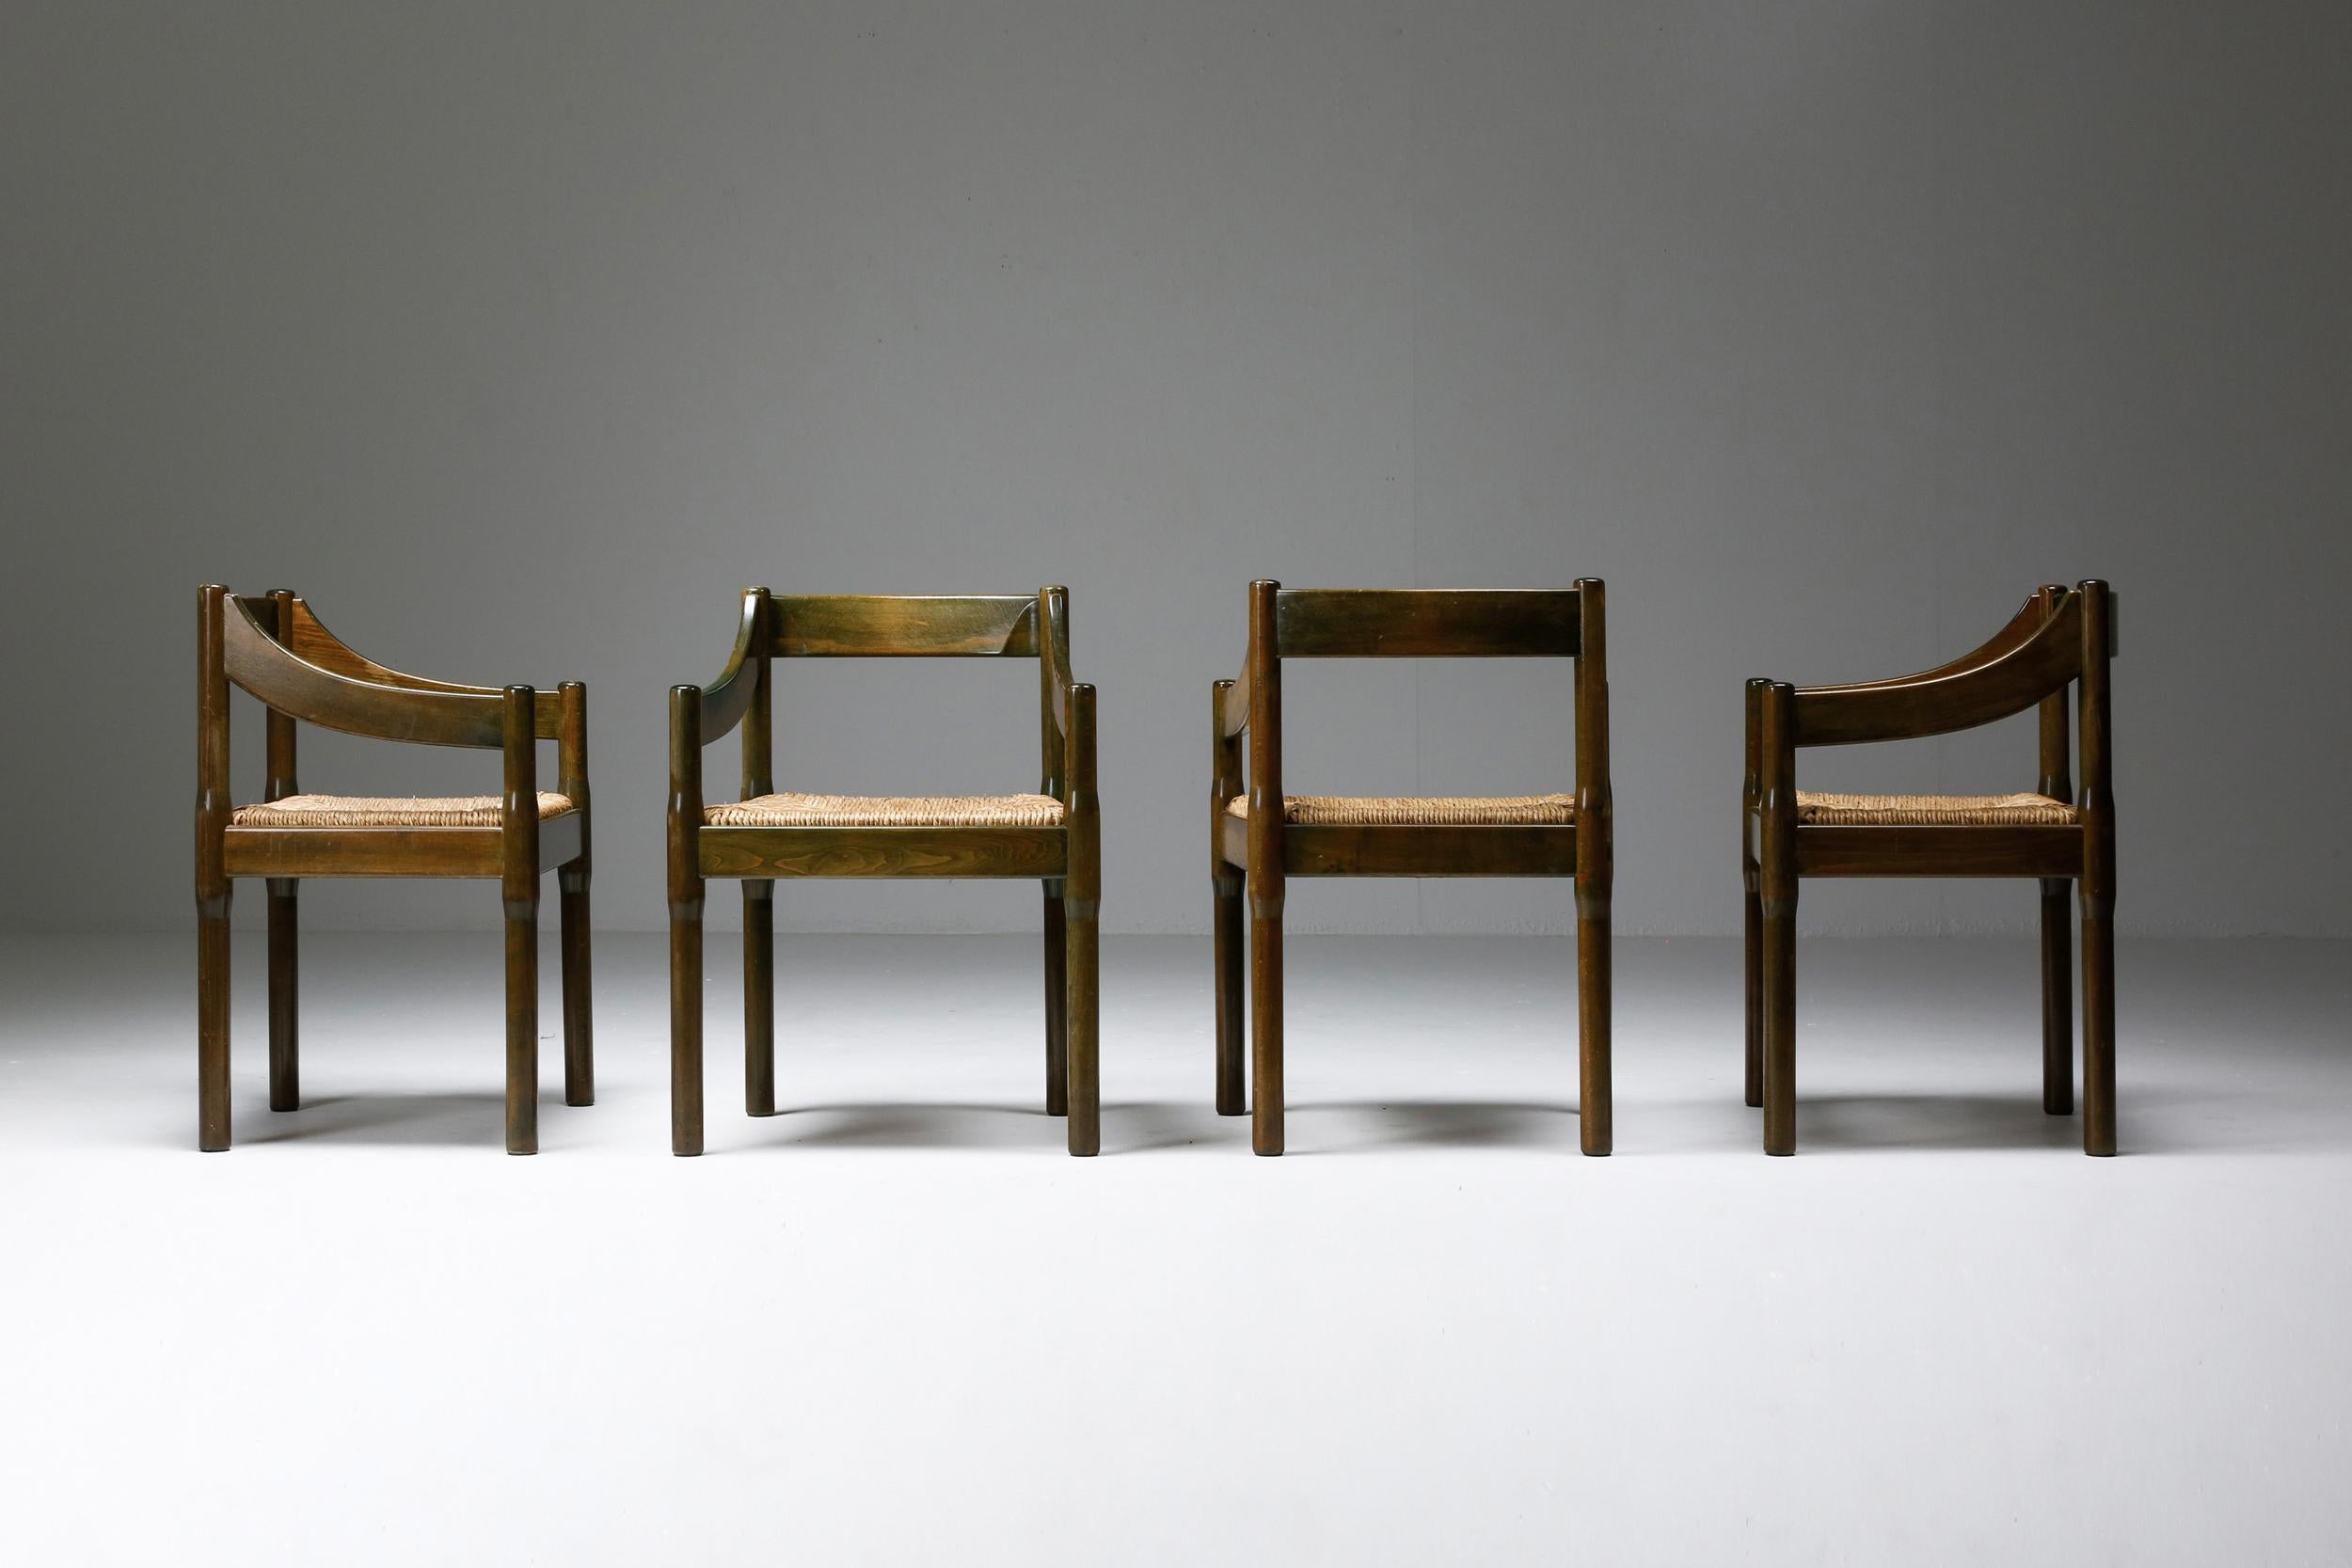 Vico Magistretti, dining chairs ‘Carimate’, lacquered beech, fabric upholstery, Italy, design, circa 1960

The ‘Carimate’ chair is one of Vico Magistretti’s most famous objects. Originally designed in red color for the ‘Carimate Golf Club’ in